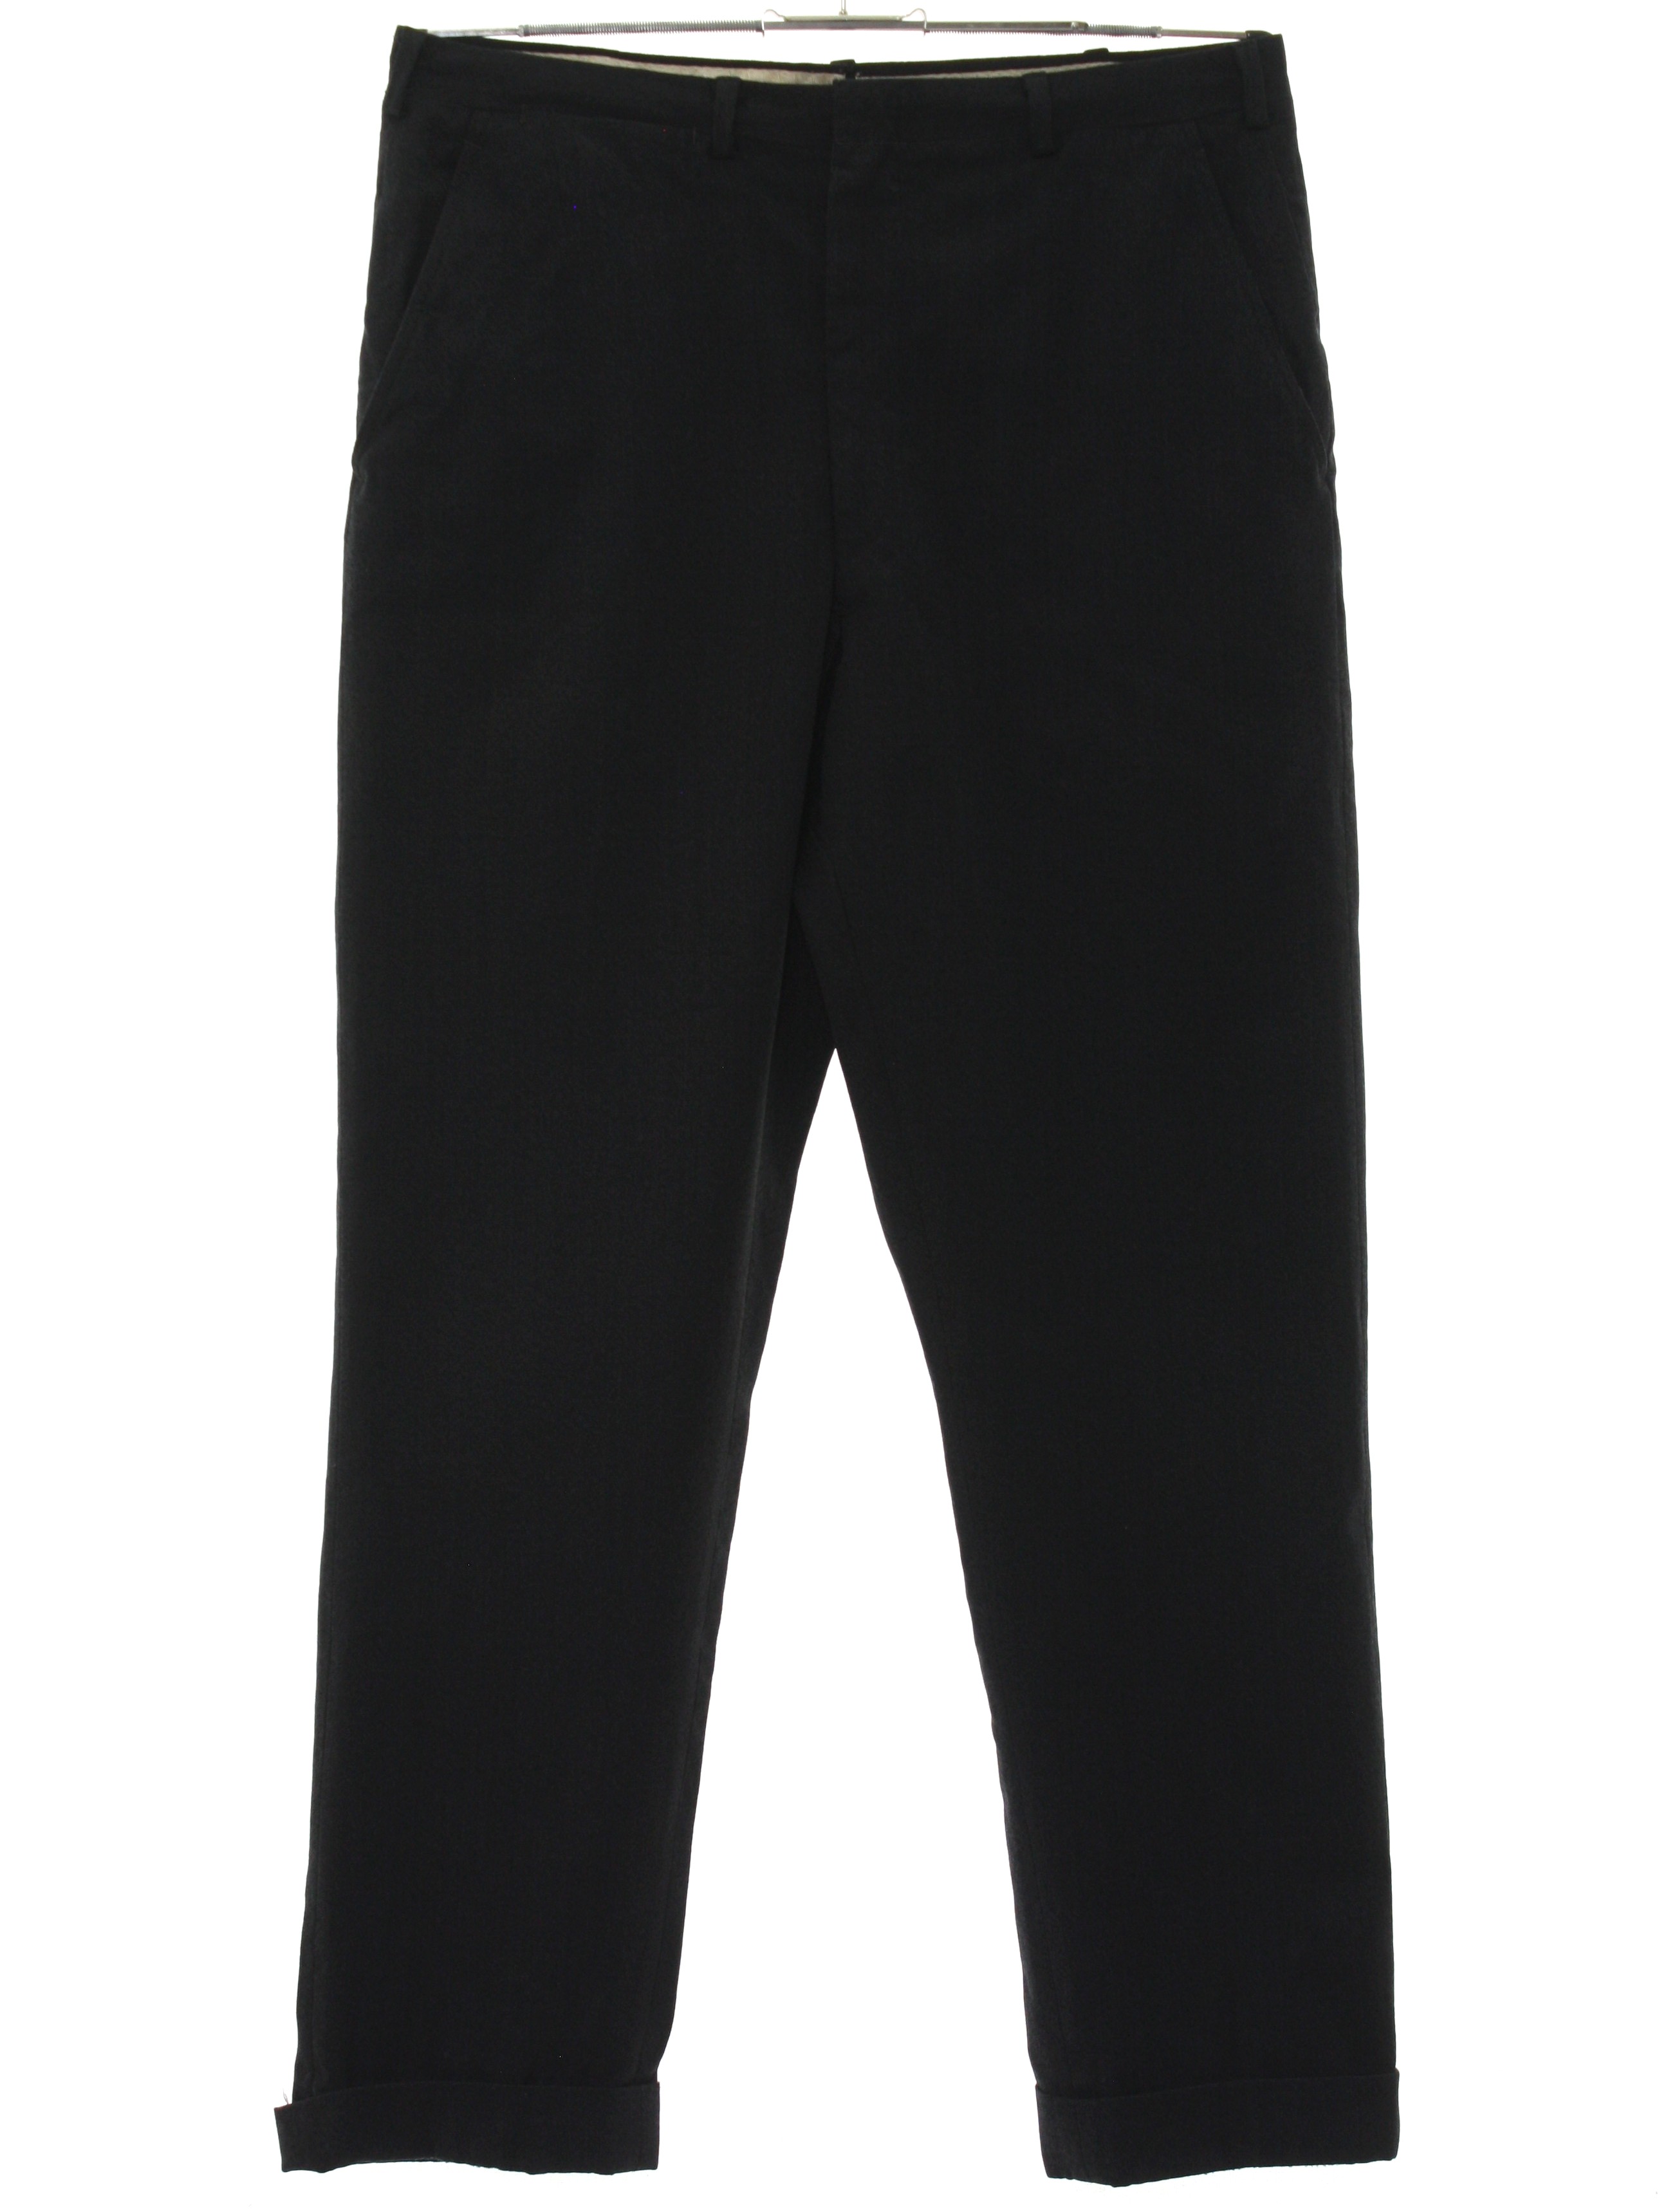 Retro 50s Pants (Missing Label) : 50s -Missing Label- Mens black and ...